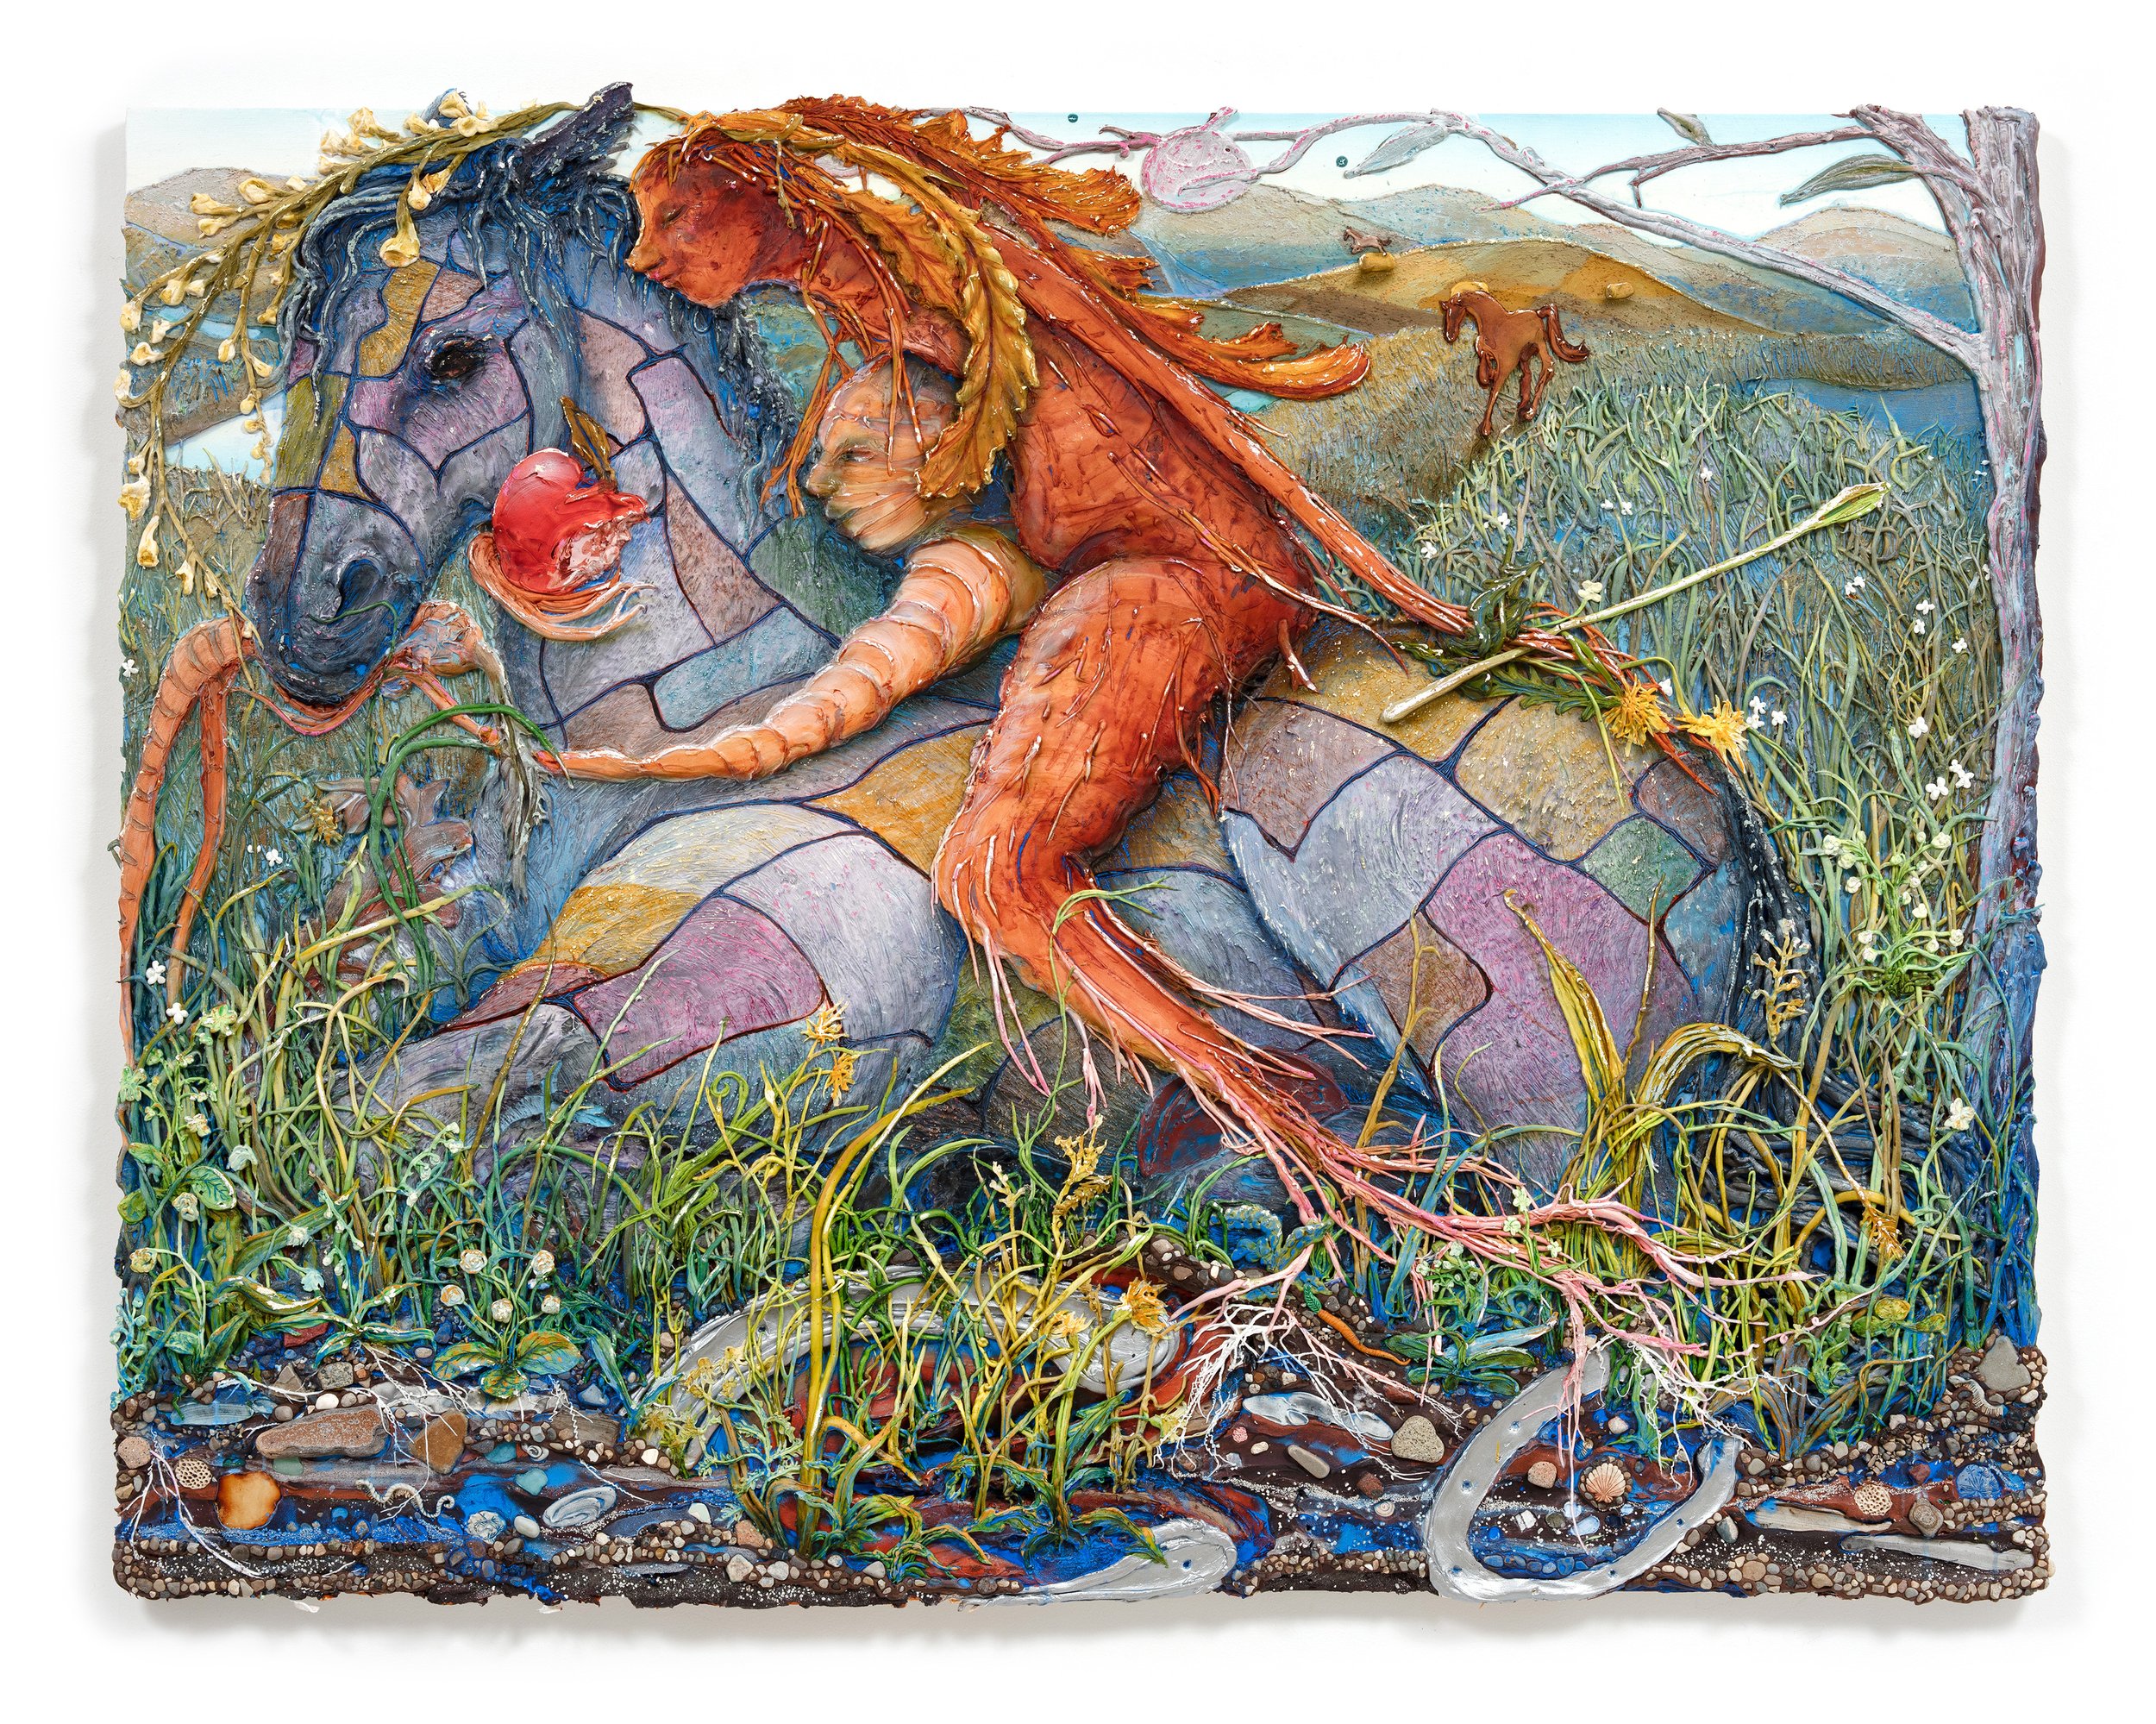   Horse Girl And The Temptation of Stillness , 2022. Acrylic, pigment, watercolor, vinyl paint, sand, pumice, glass, mica, rocks from Lake Michigan, paper clay, brick, found objects, shells and oil stick on canvas, 56.5 x 72 x 2.5 in. (143.5 x 182.9 